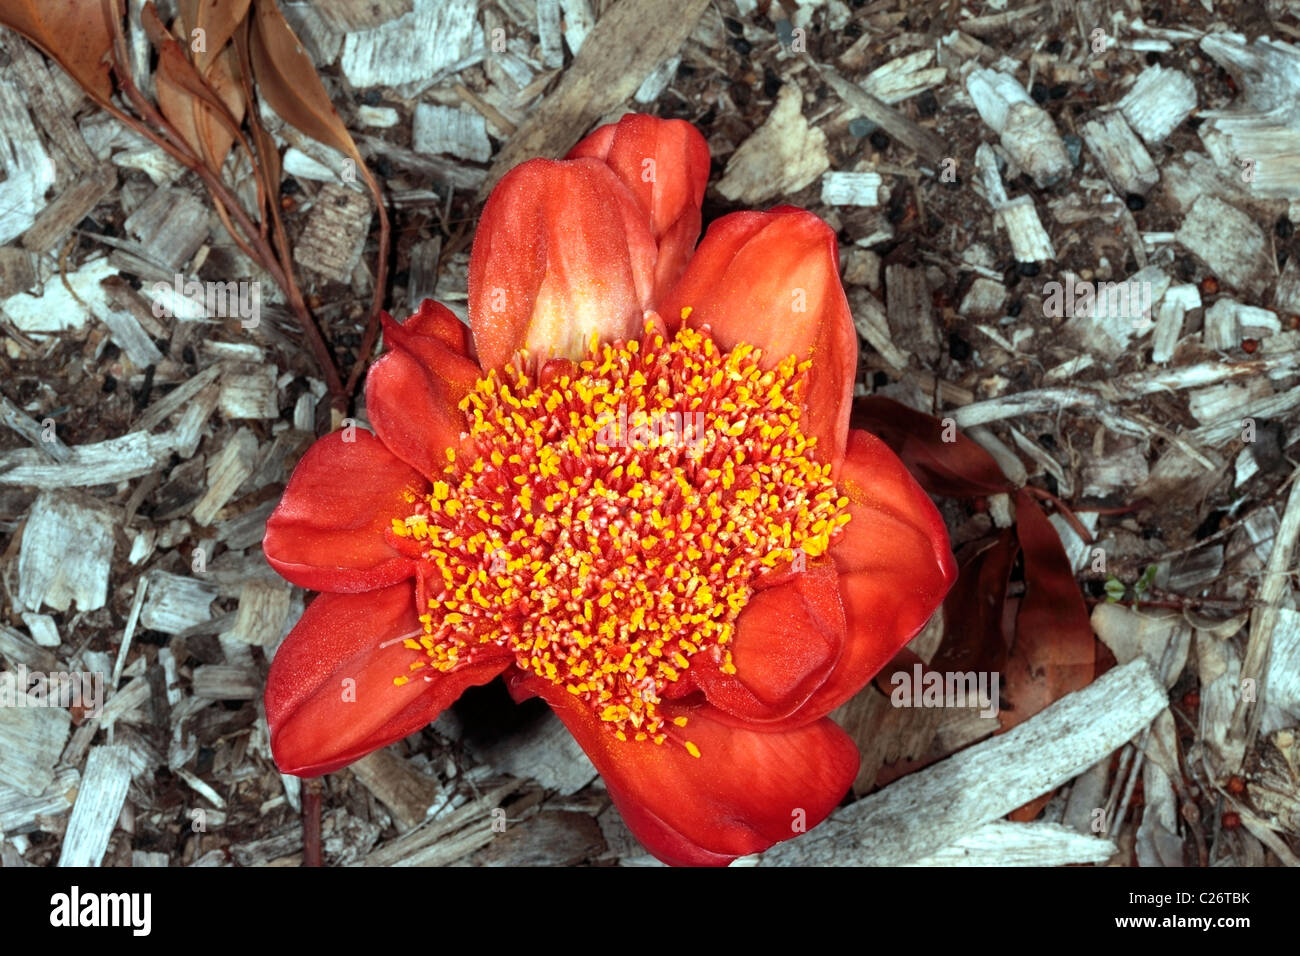 April Fool/March Flower/Blood Flower/Paintbrush Lily/ Powderpuff Lily/Pincushion- Haemanthus coccineus- Family Amyrillidaceae Stock Photo